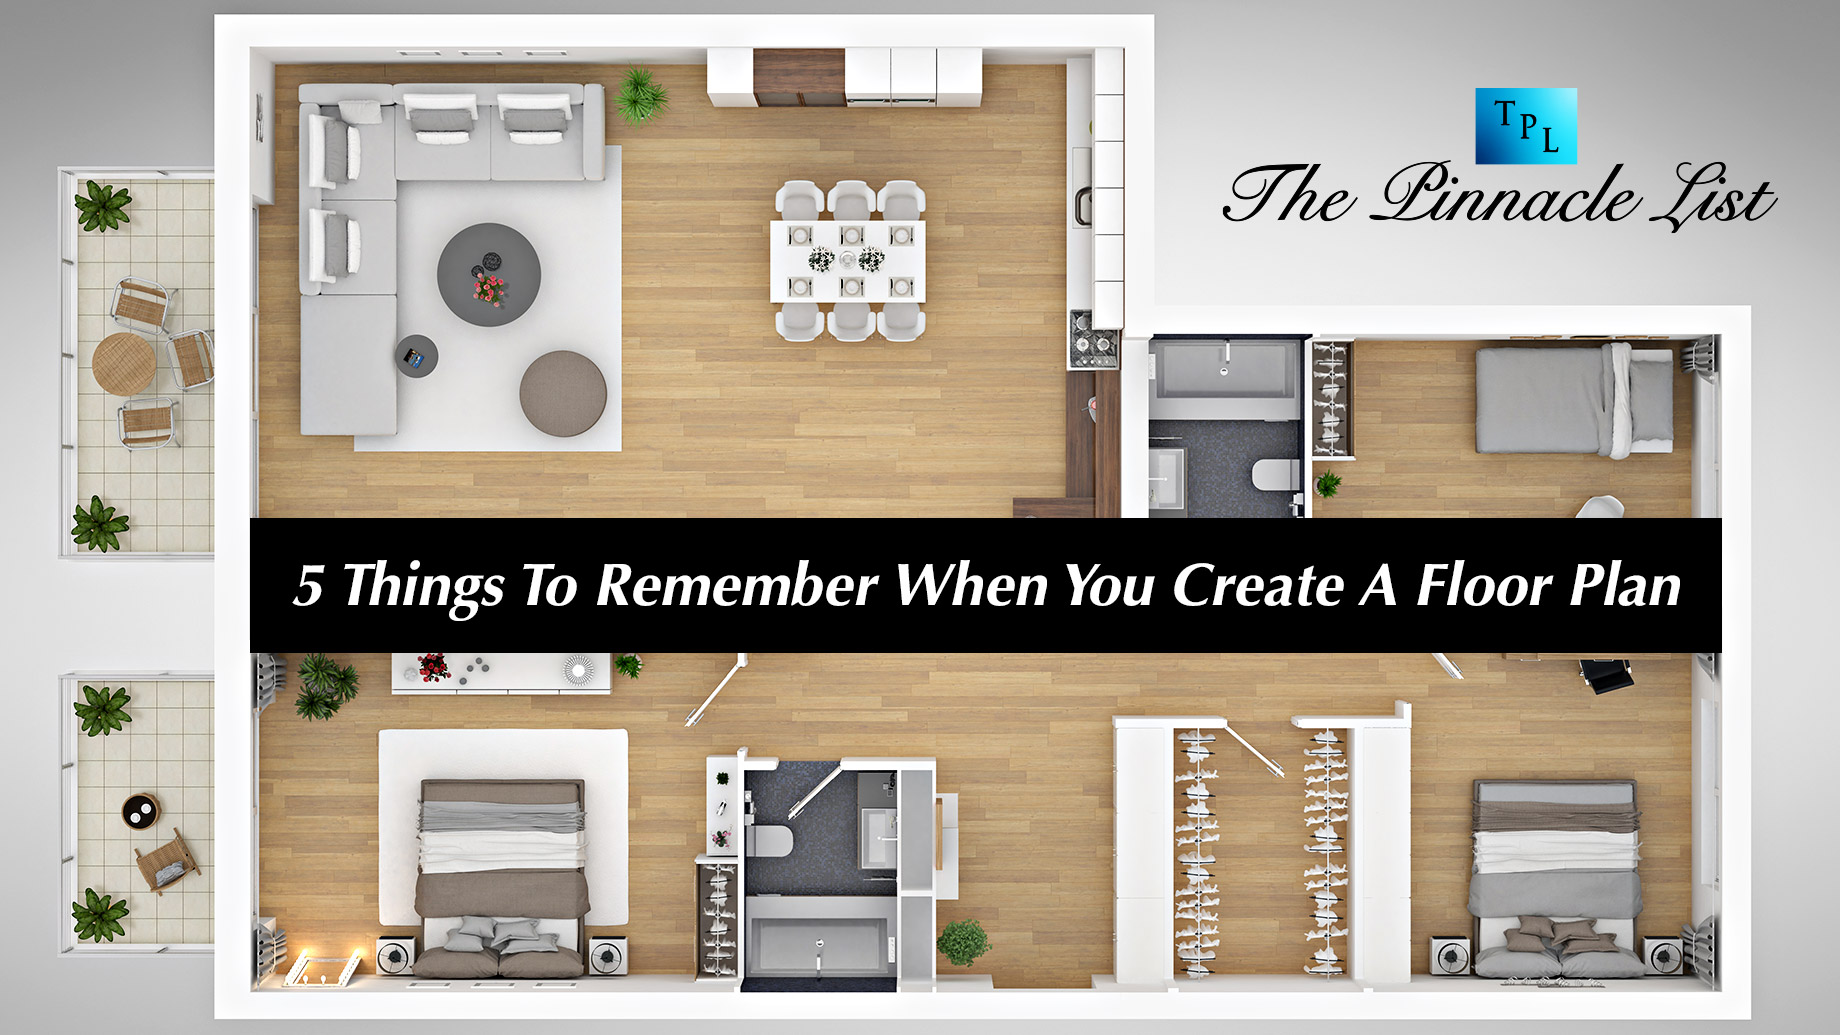 5 Things To Remember When You Create A Floor Plan